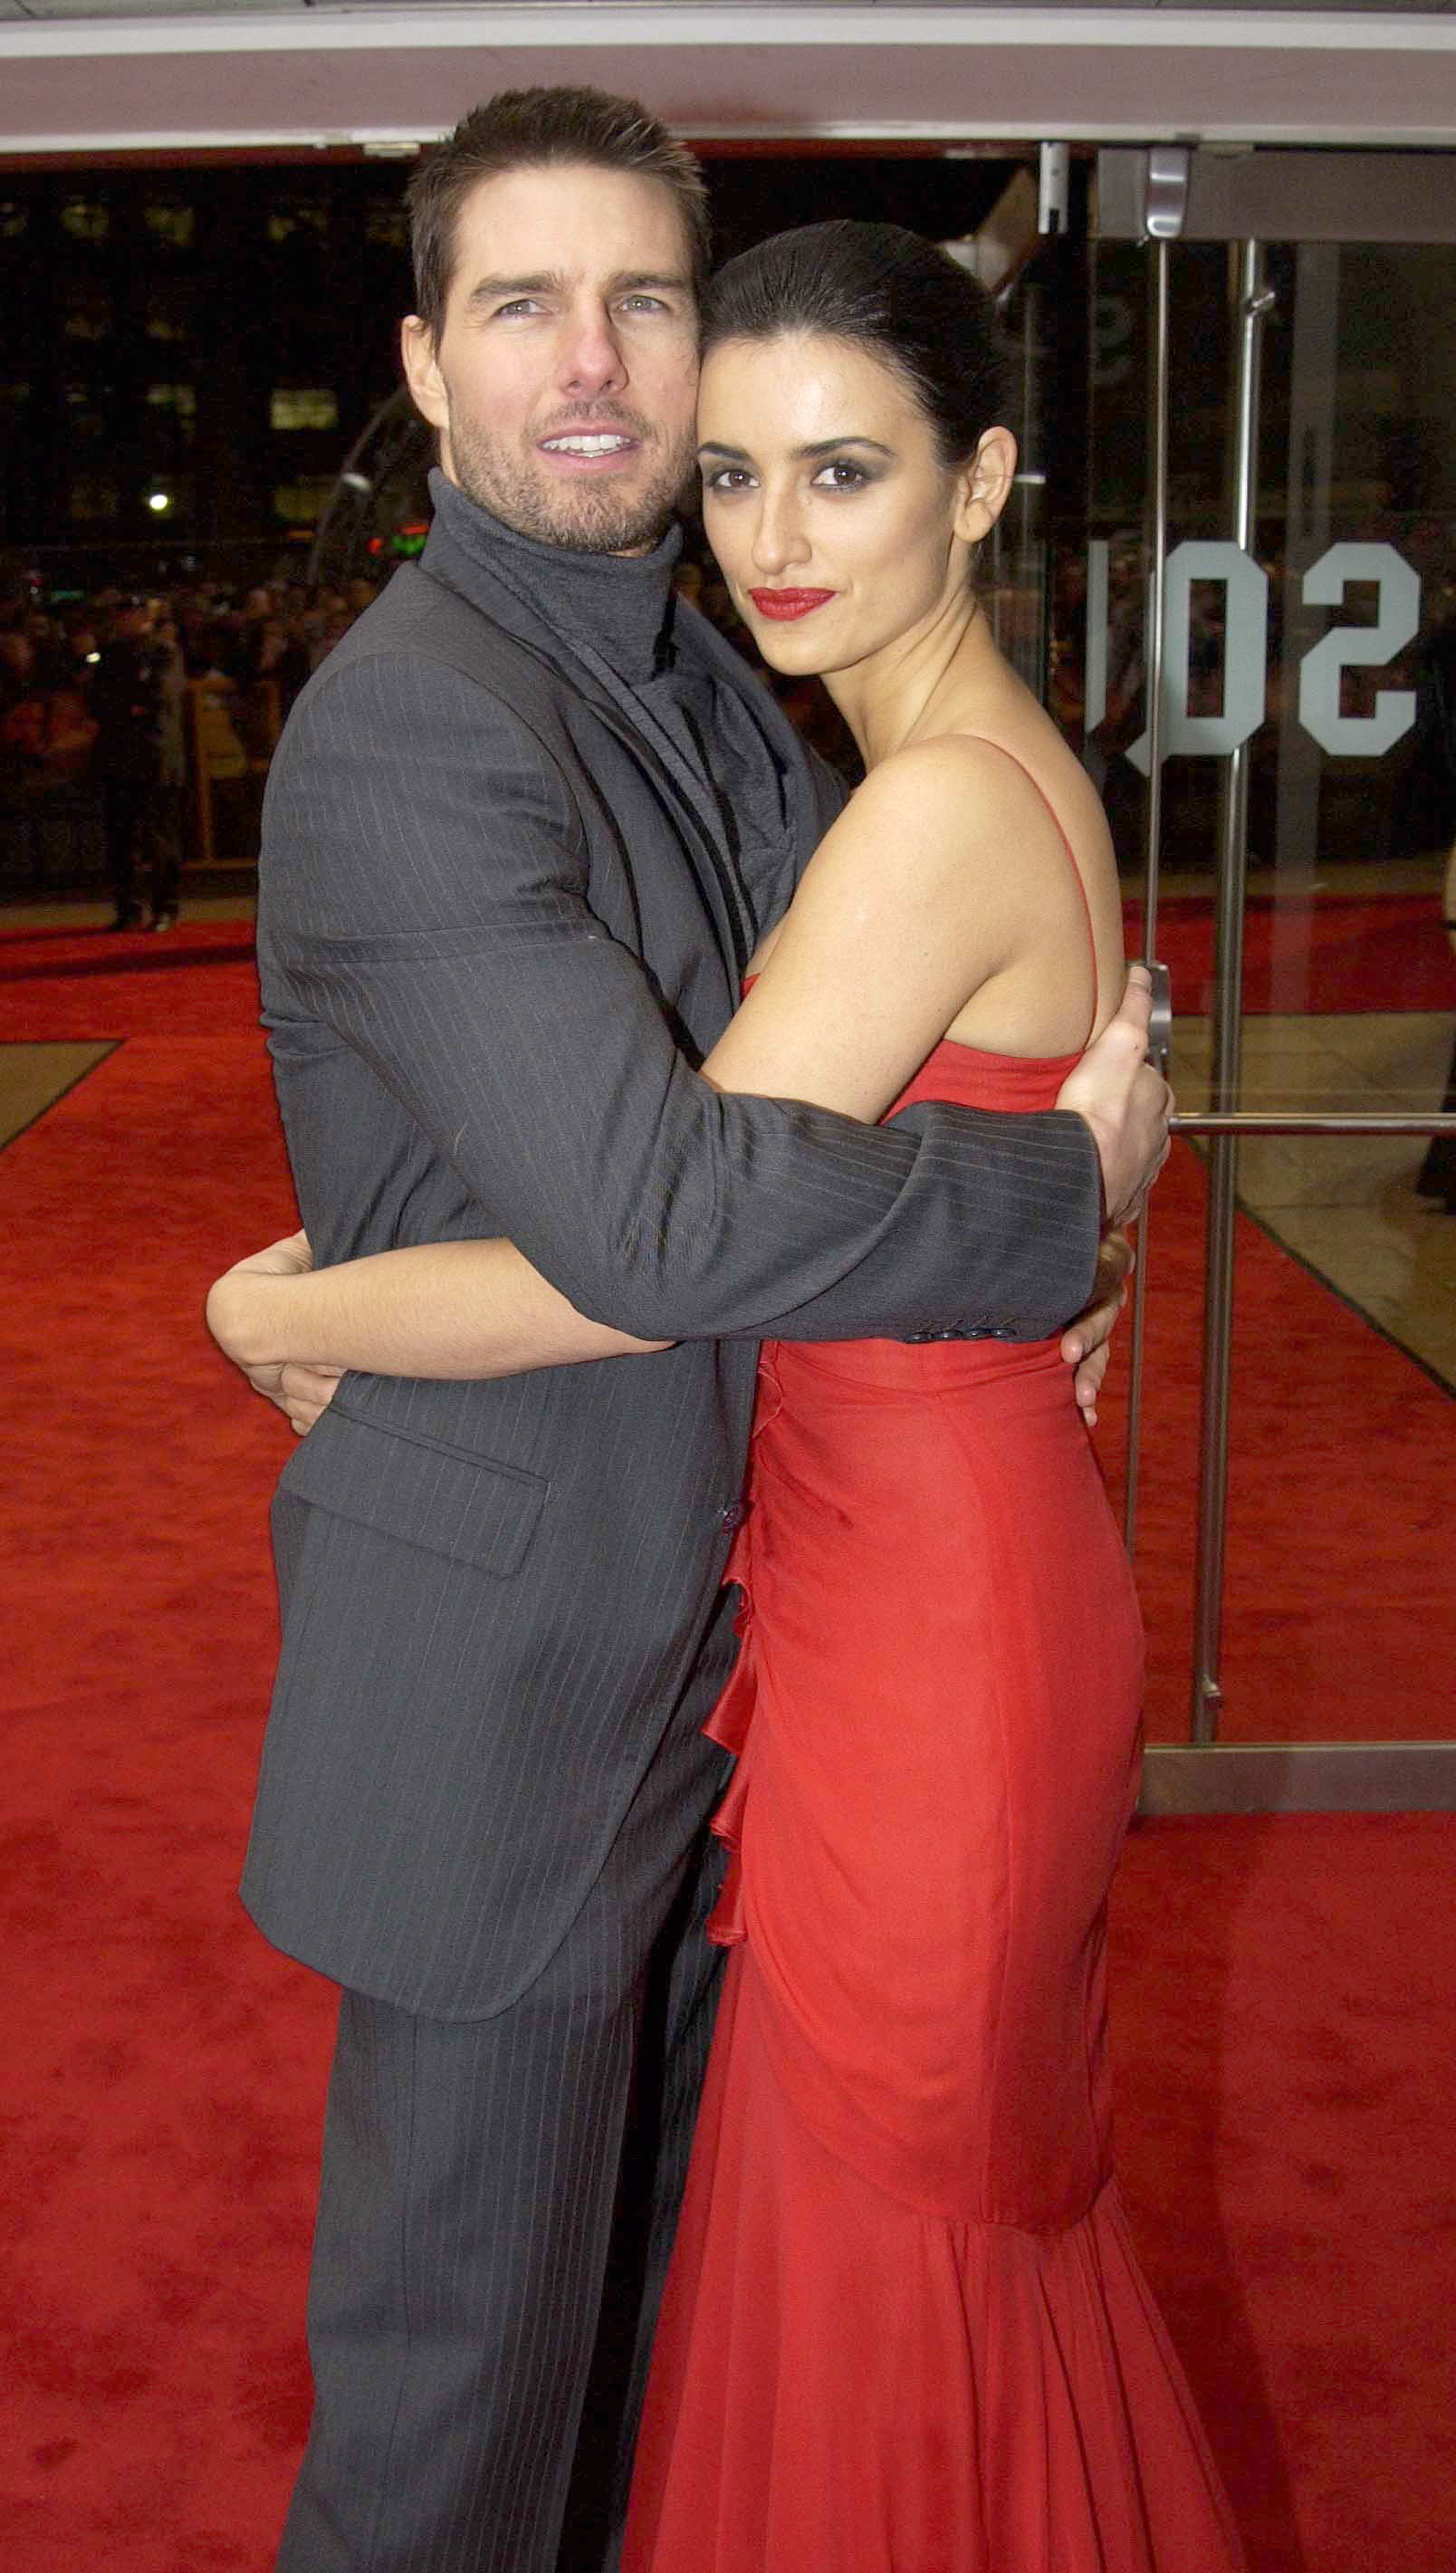 <p>In early 2004, Tom Cruise and <a href="https://www.wonderwall.com/celebrity/profiles/overview/penelope-cruz-373.article">Penelope Cruz</a> parted ways after a three-year romance. They're seen here on one of their final red carpets together that January.</p>